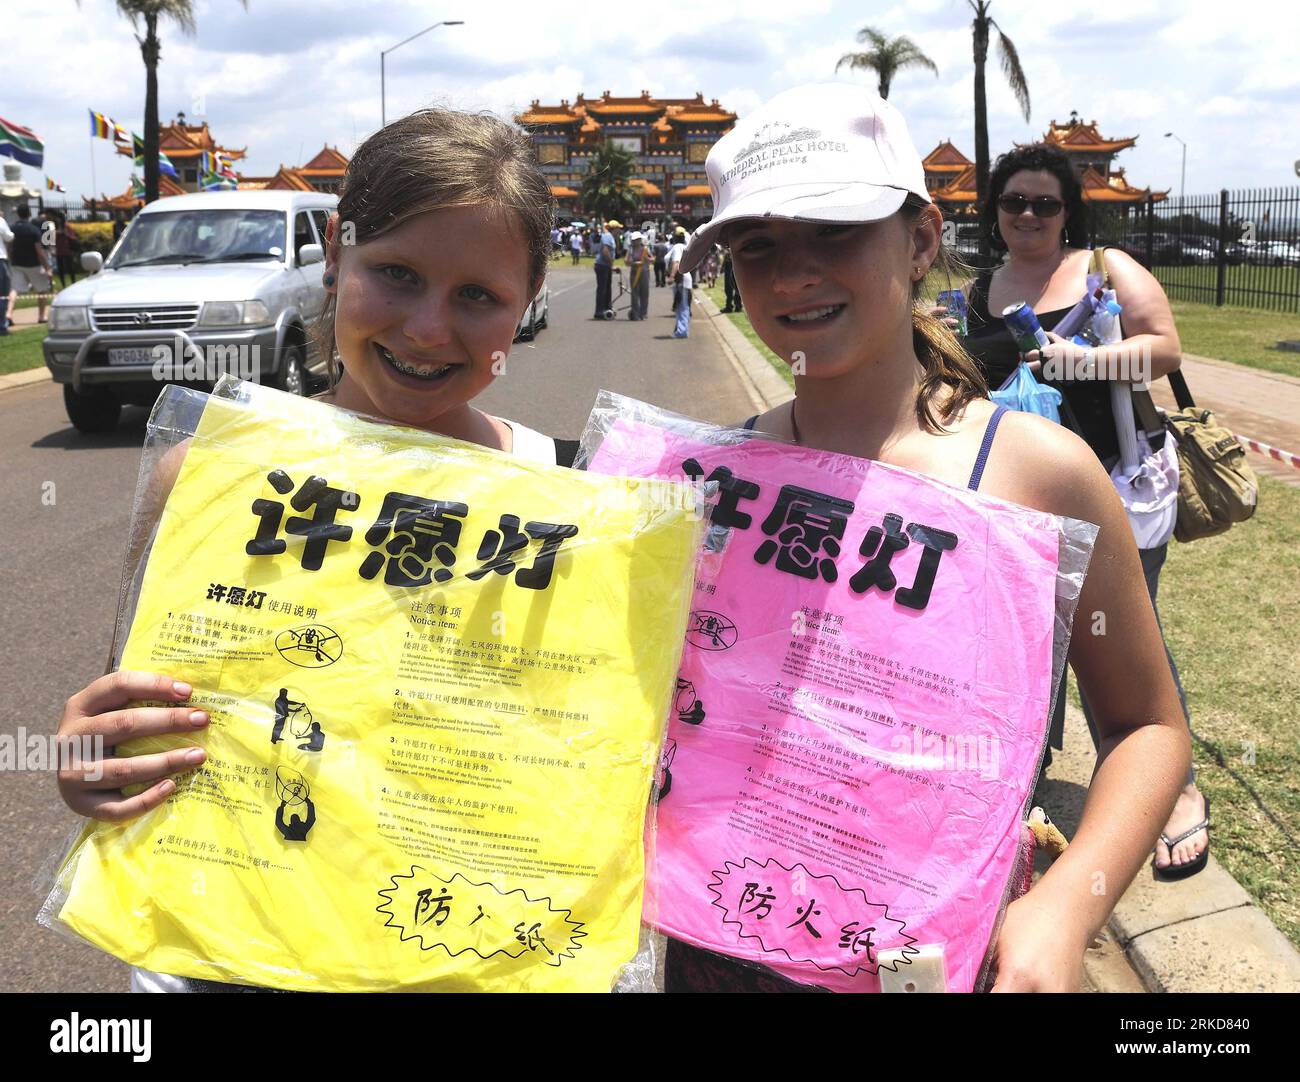 Bildnummer: 54884173  Datum: 06.02.2011  Copyright: imago/Xinhua (110206) -- PRETORIA, Feb. 6, 2011 (Xinhua) -- Two South African girls show their well-wish lantern packed in the plastic bags at the Chinese New Year Culture Festival held by the Nan Hua Temple in Bronkhorstspruit, South Africa, Feb. 6, 2011. The Chinese New Year Culture Festival held on Sunday has attracted more than 15,000 overseas Chinese and local civilians to enjoy the Chinese culture including watching lion and dragon dances, receiving bonus, tasting Chinese tea and food. (Xinhua/Li Qihua) SOUTH AFRICA-CHINESE NEW YEAR CUL Stock Photo